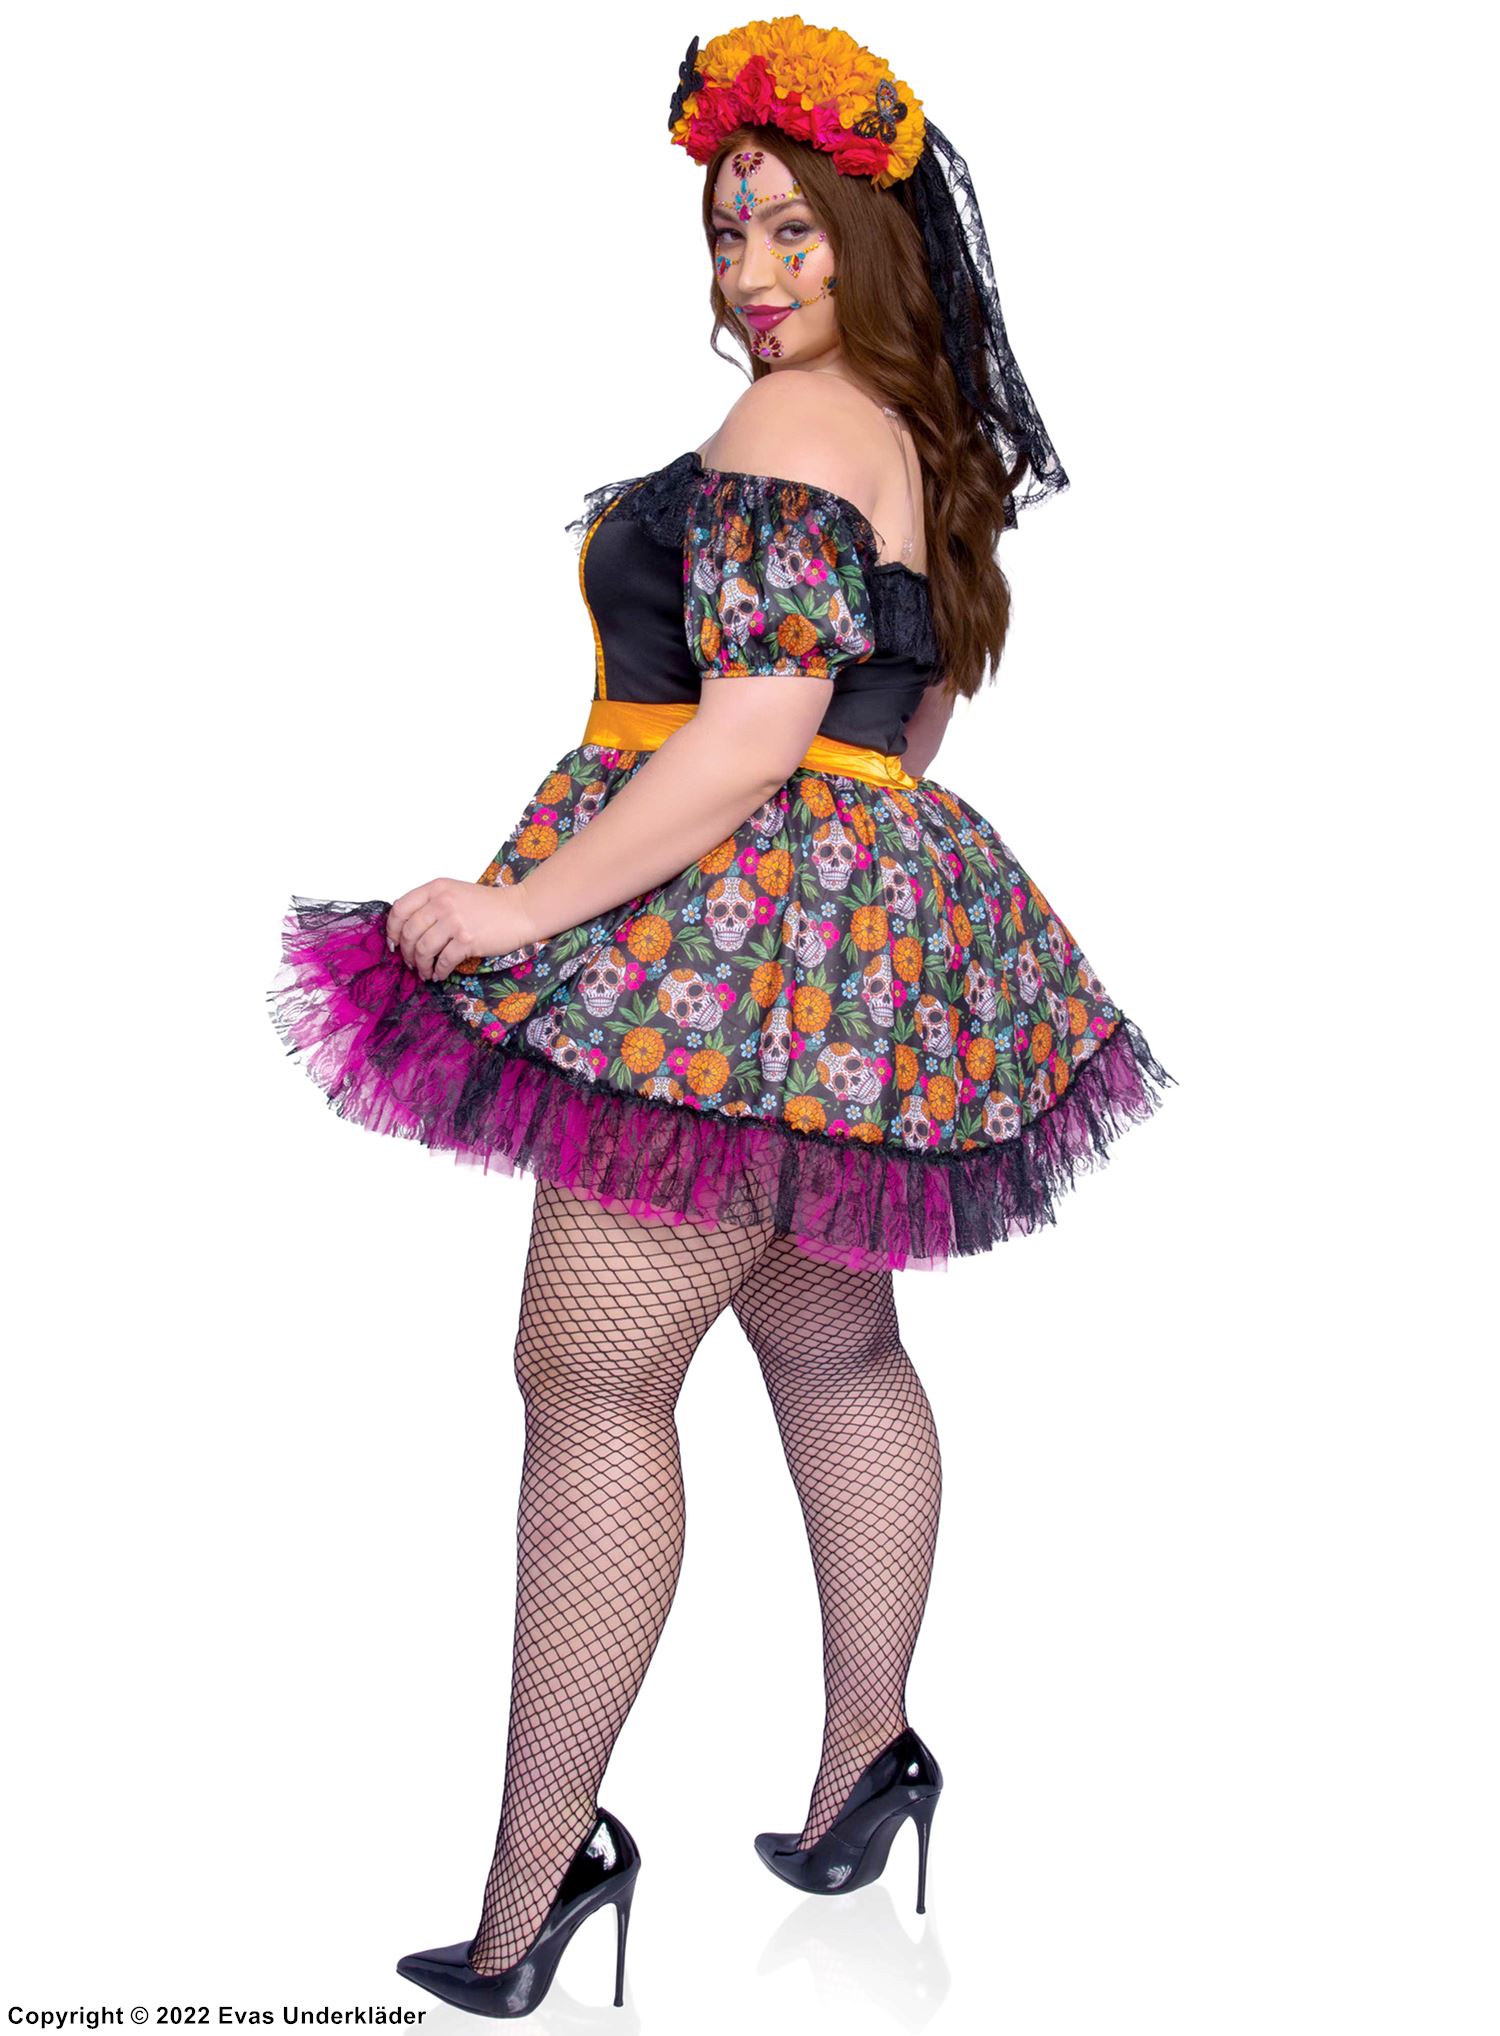 Day of the Dead, costume dress, lace trim, sugar skull (Calavera), cold shoulder, puff sleeves, plus size